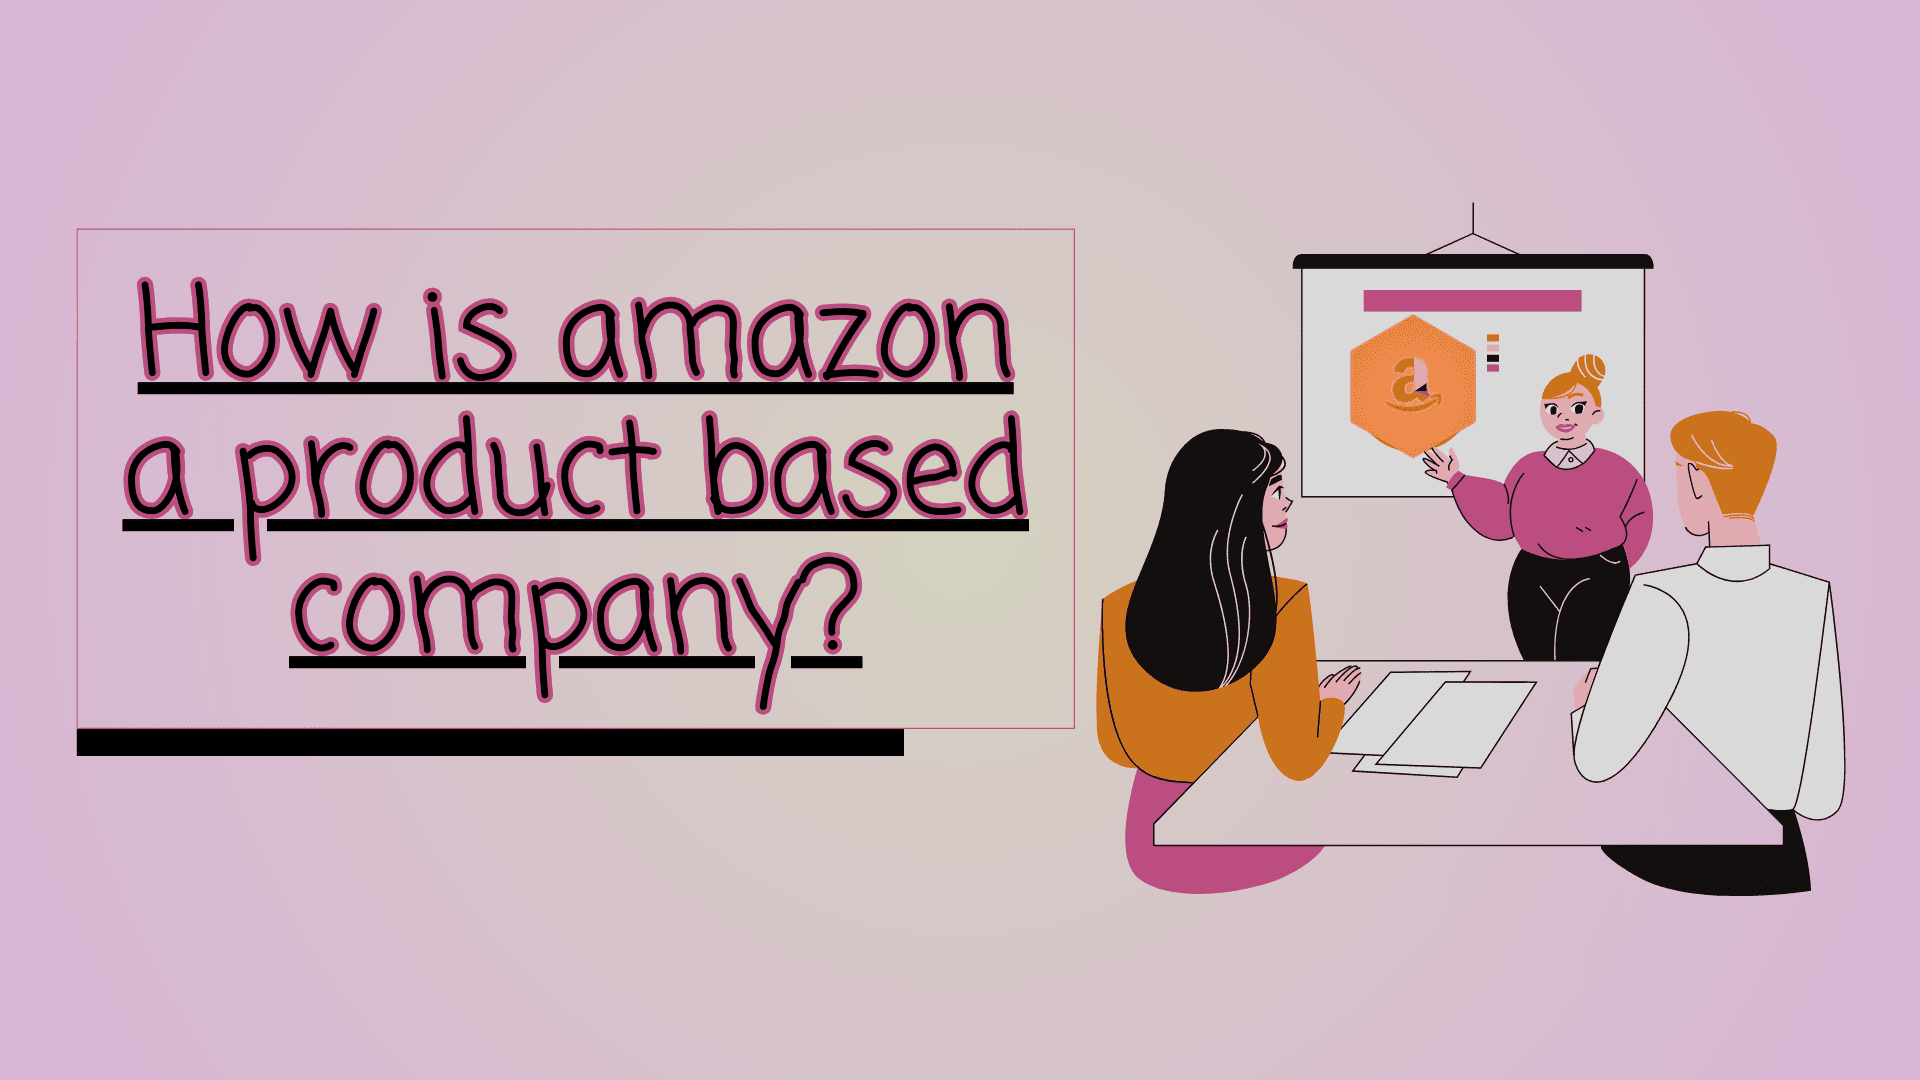 How is amazon a product based company?